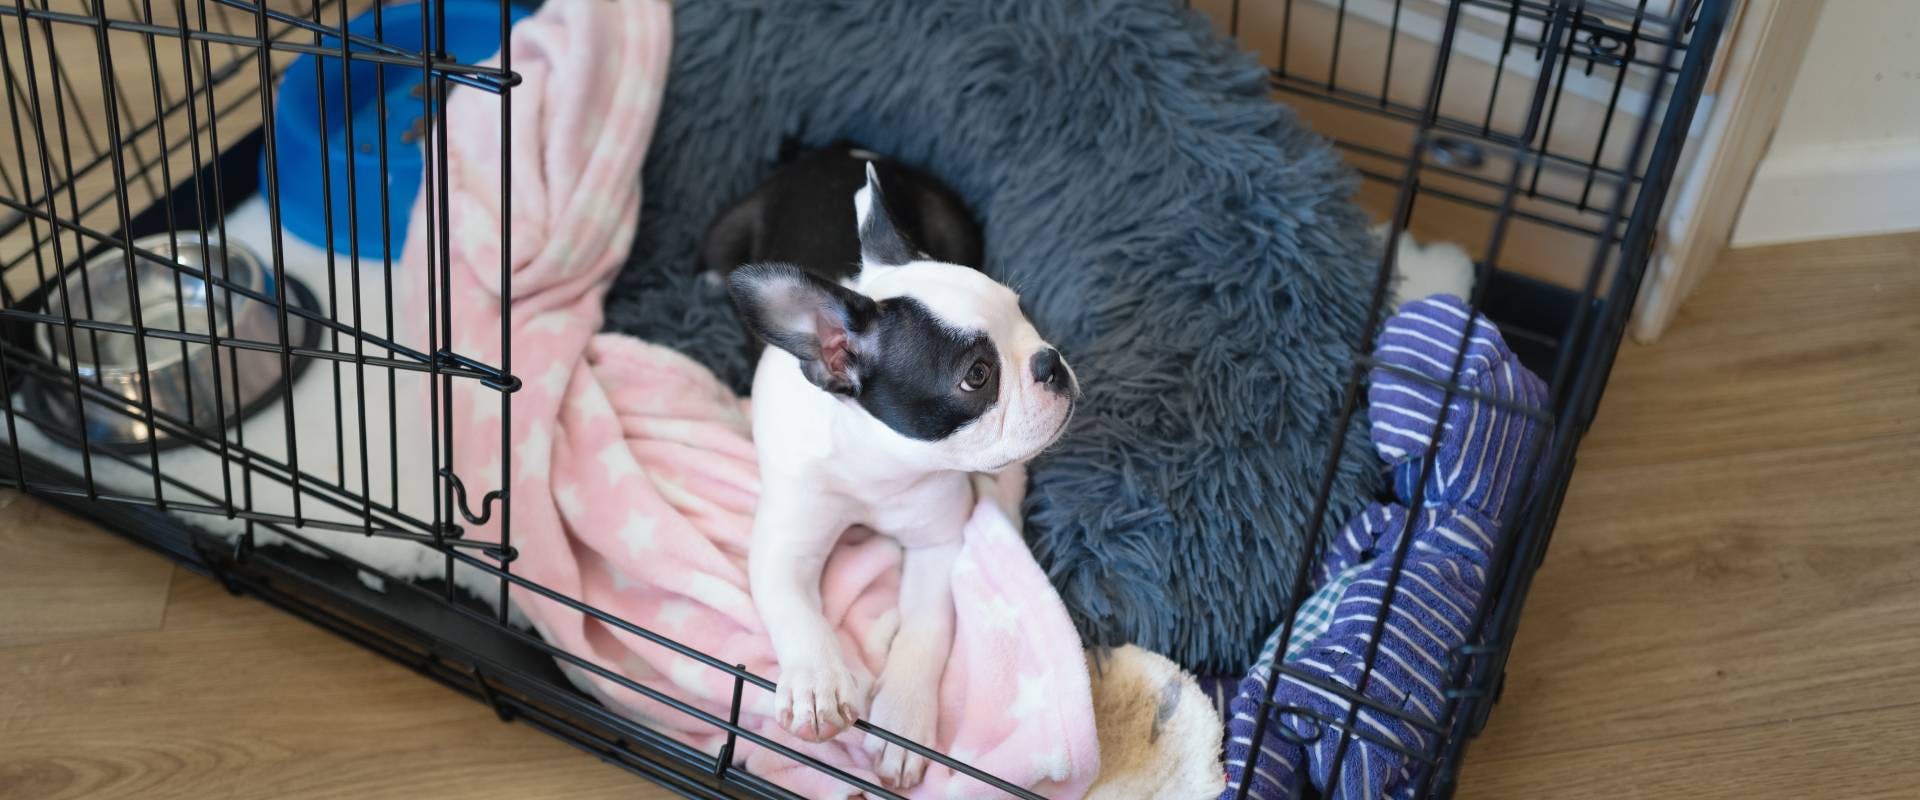 a young puppy in their crate lying on a comfy dog bed and blankets next to their water bowl